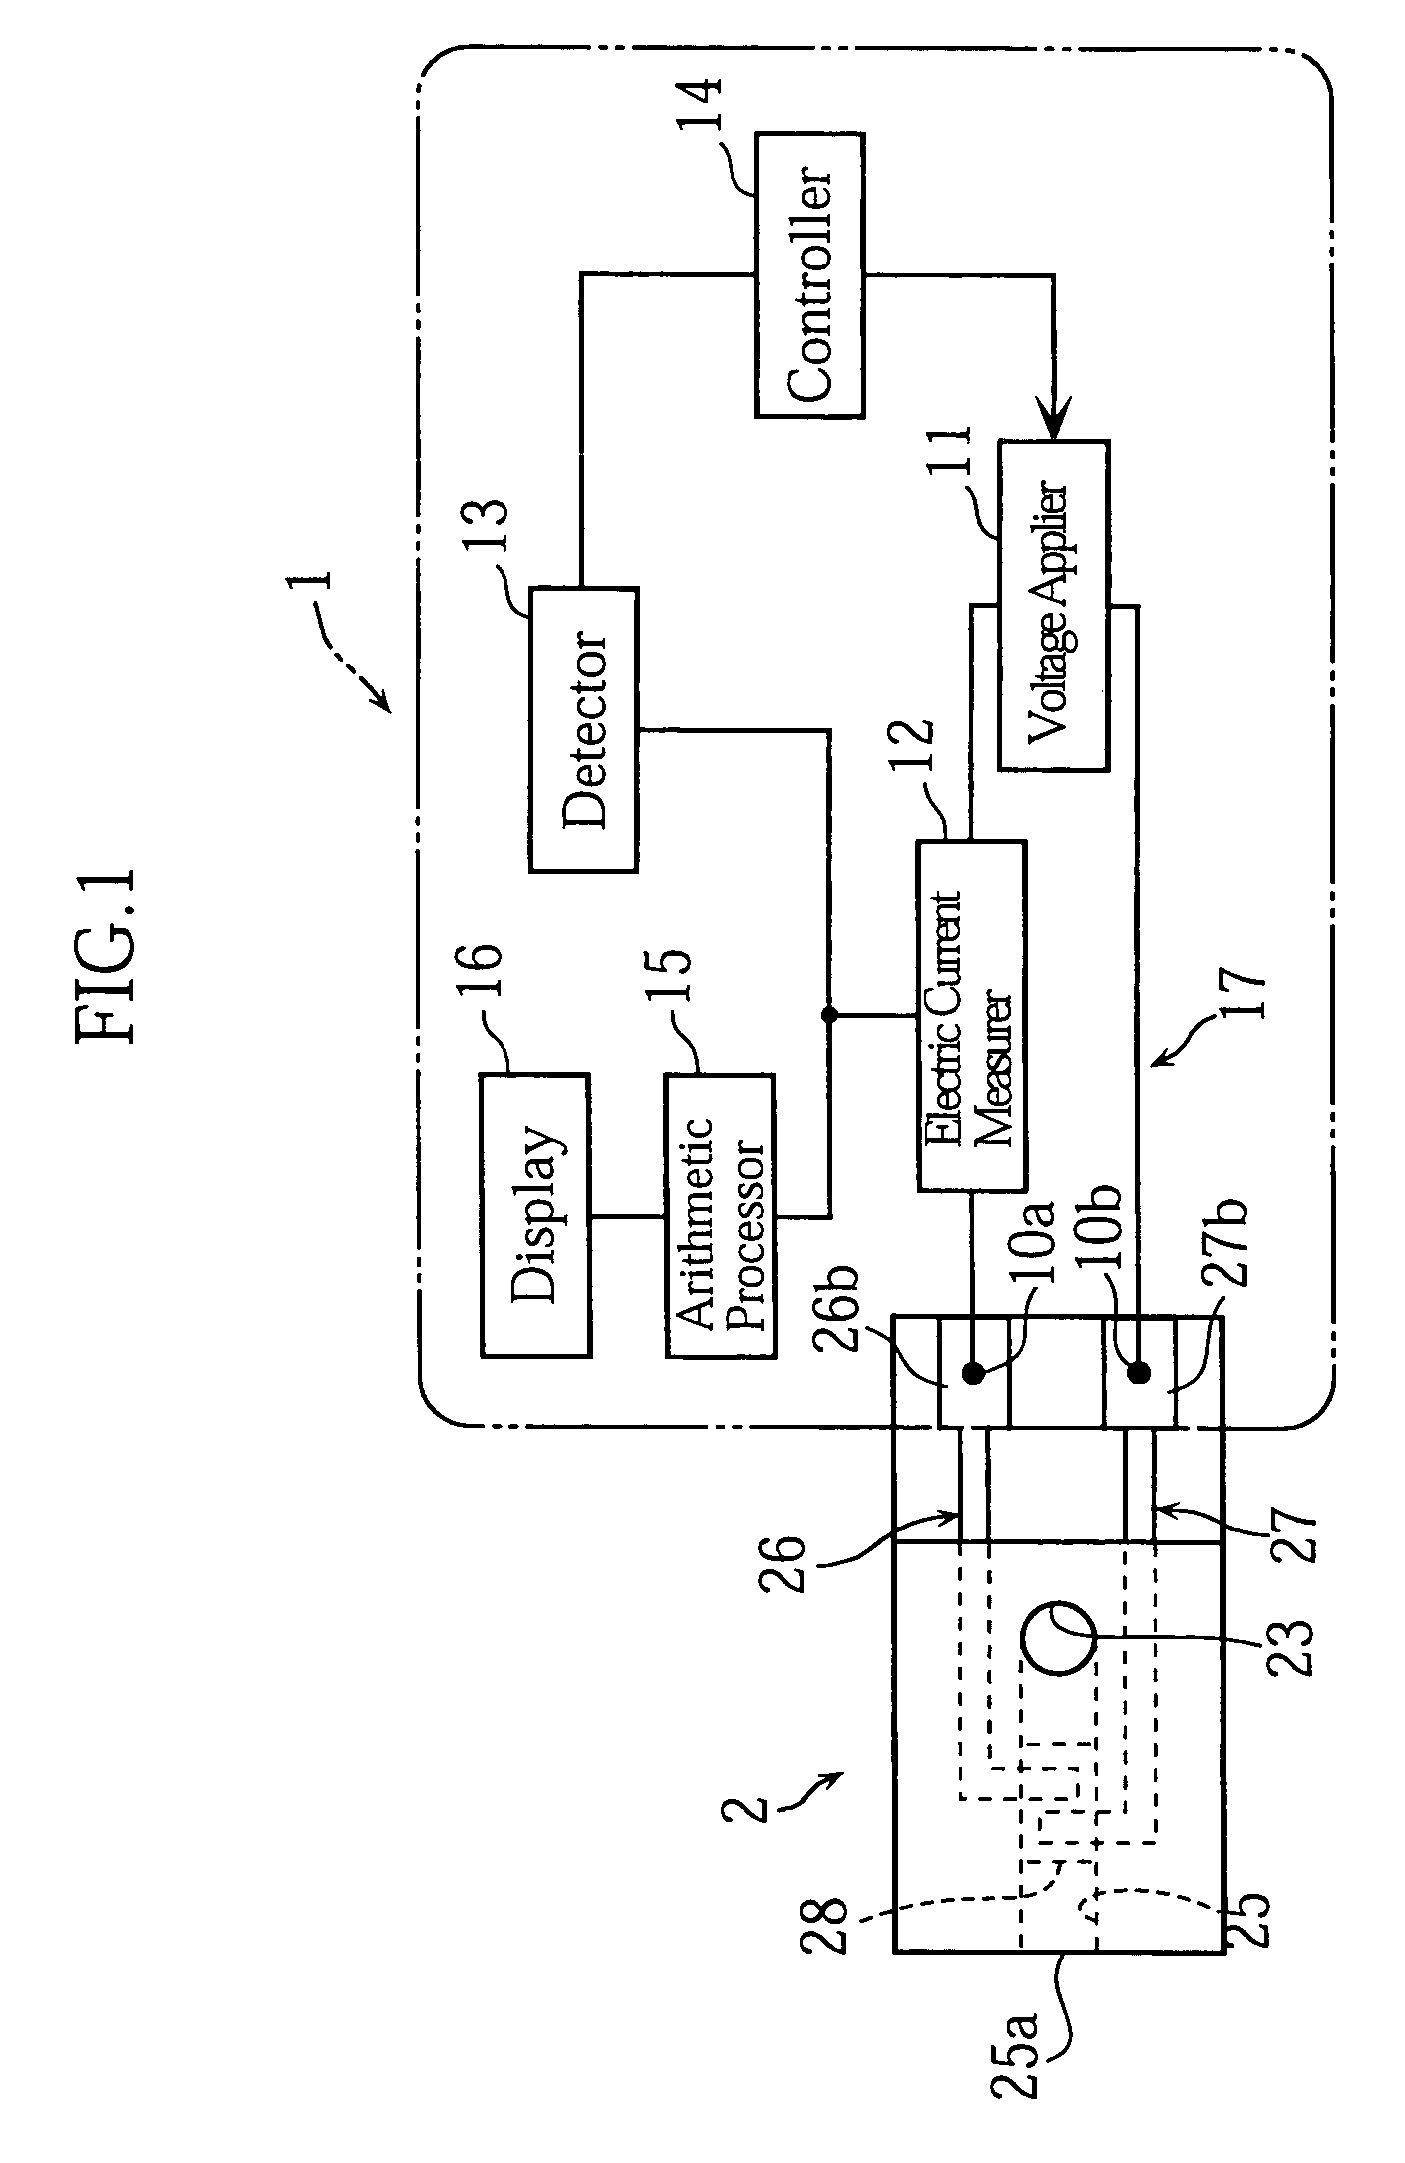 Method and apparatus for measuring specific component